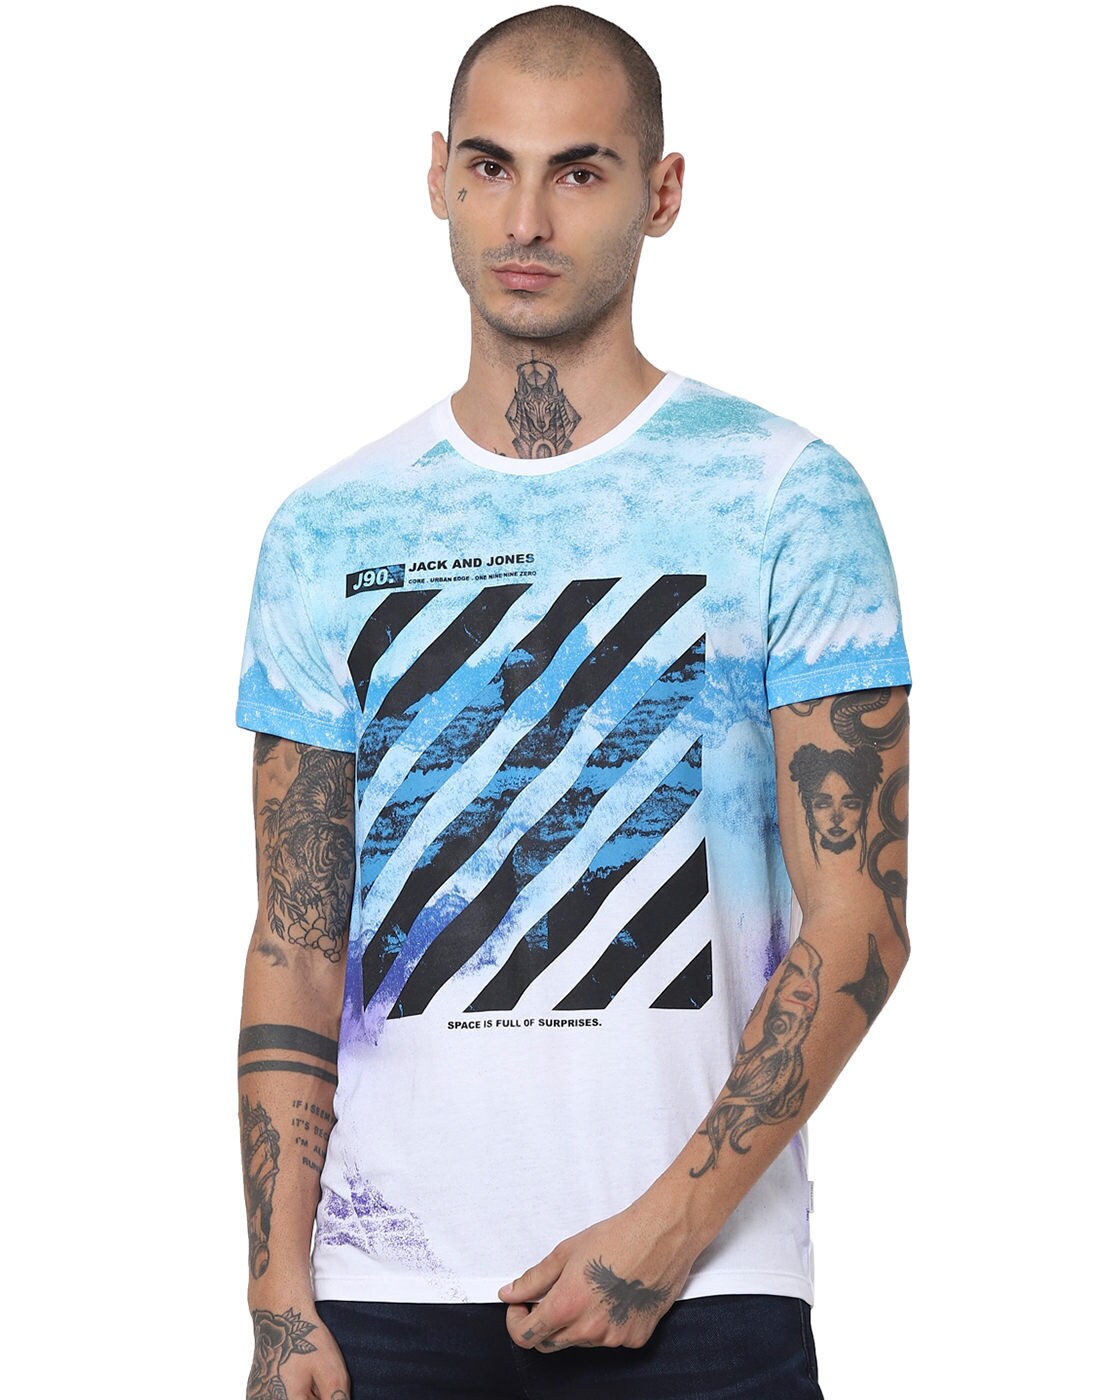 Men's T shirt Tee Abstract Graphic Prints Crew Neck Green Blue